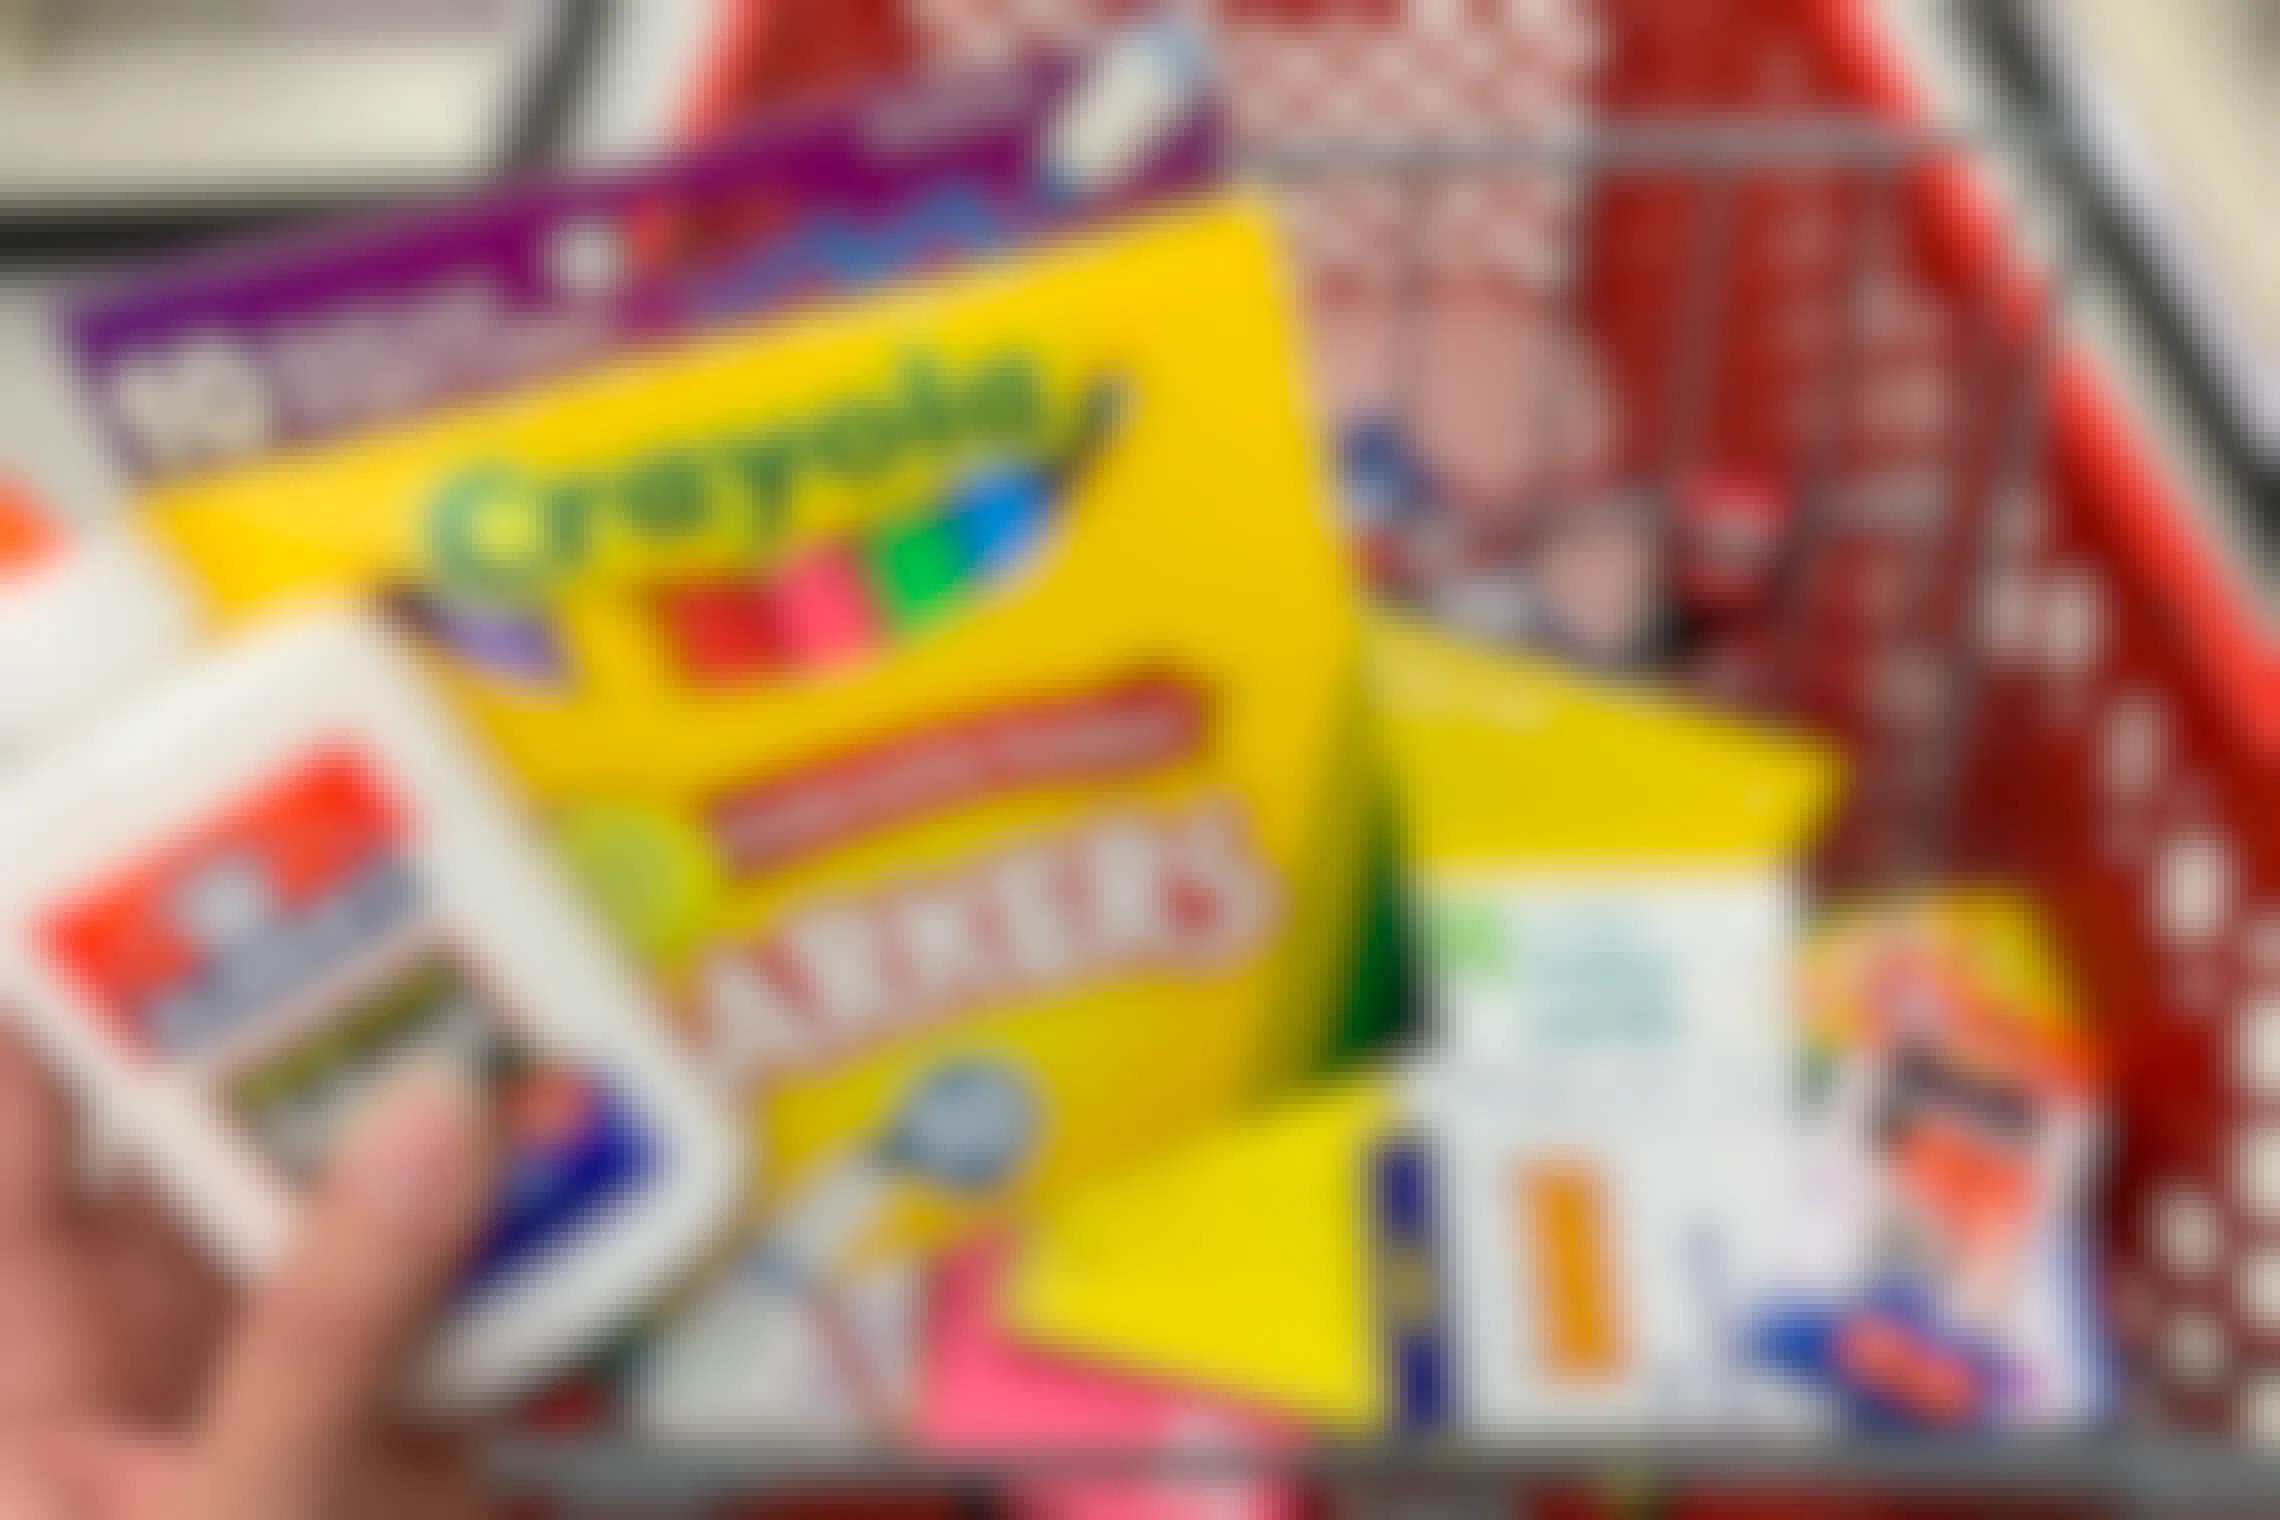 A person's hand holding Crayola markers and Elmer's glue above a Target shopping cart basket filled with other school supplies.